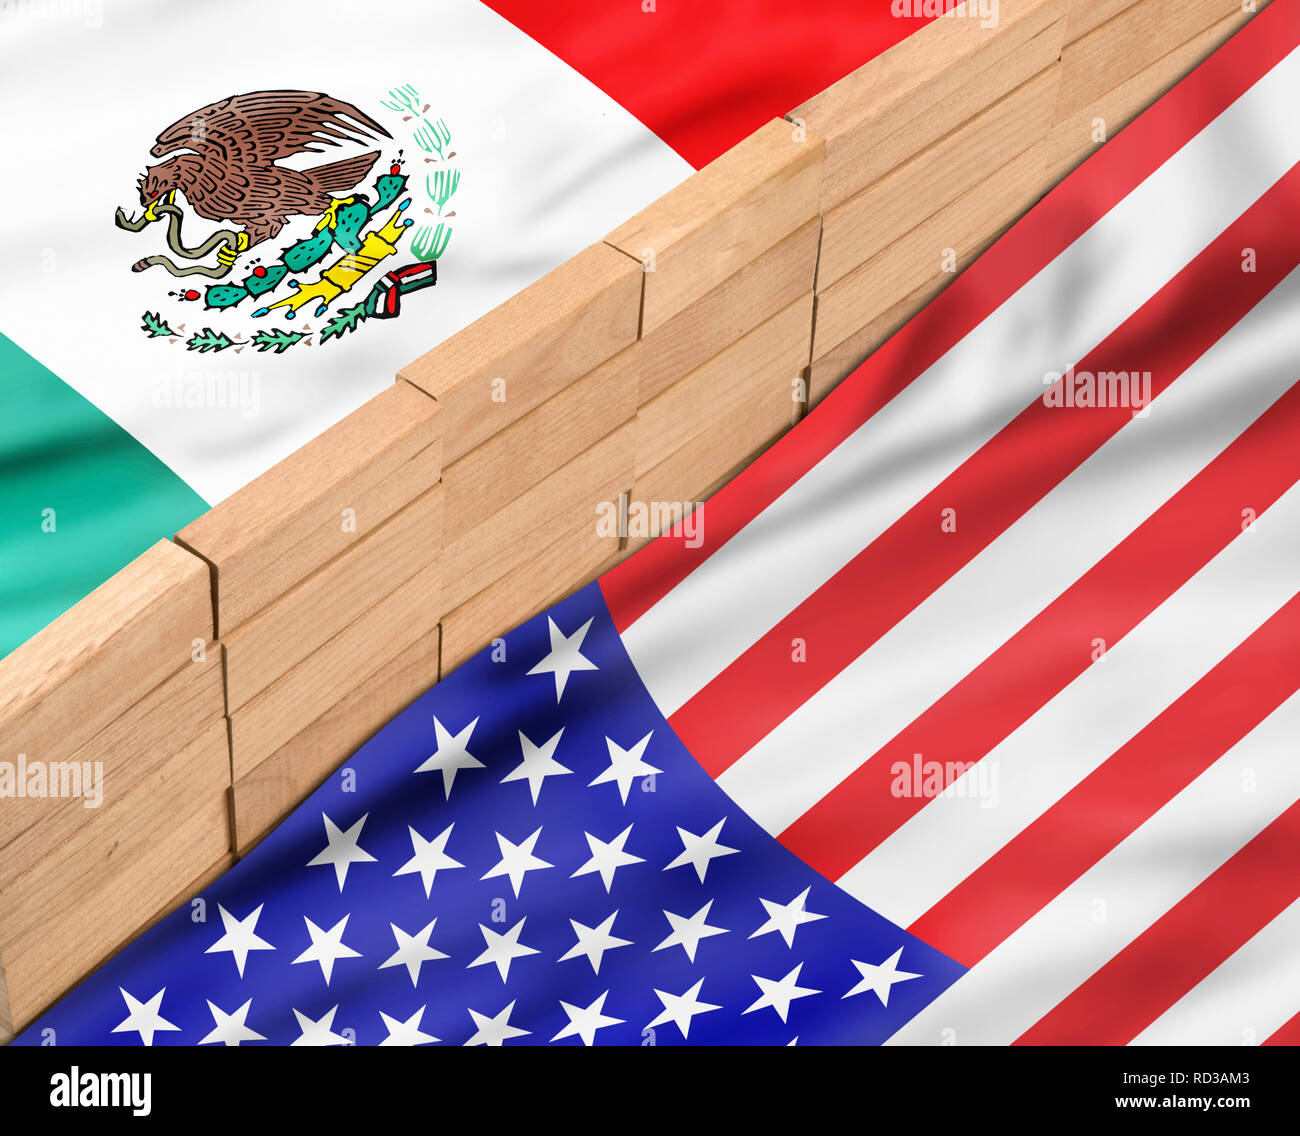 Build the wall with USA and Mexico. Stock Photo